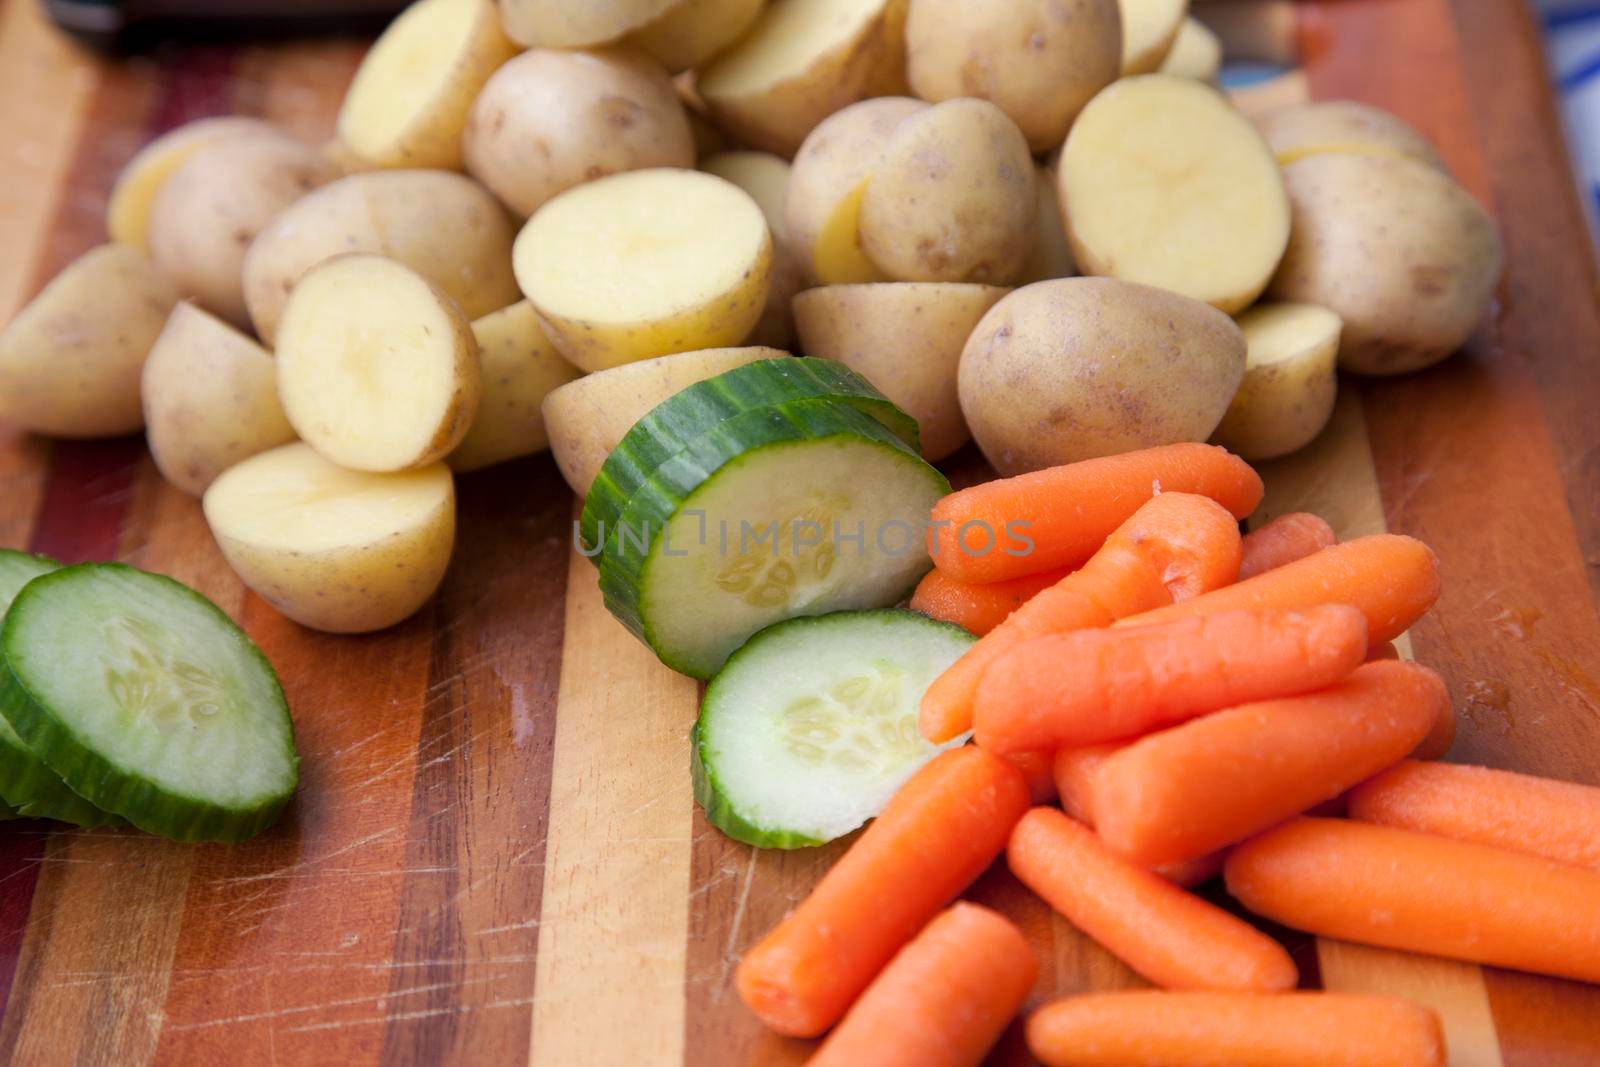 Freshly cut carrots, potatoes and cucumbers on a wooden board